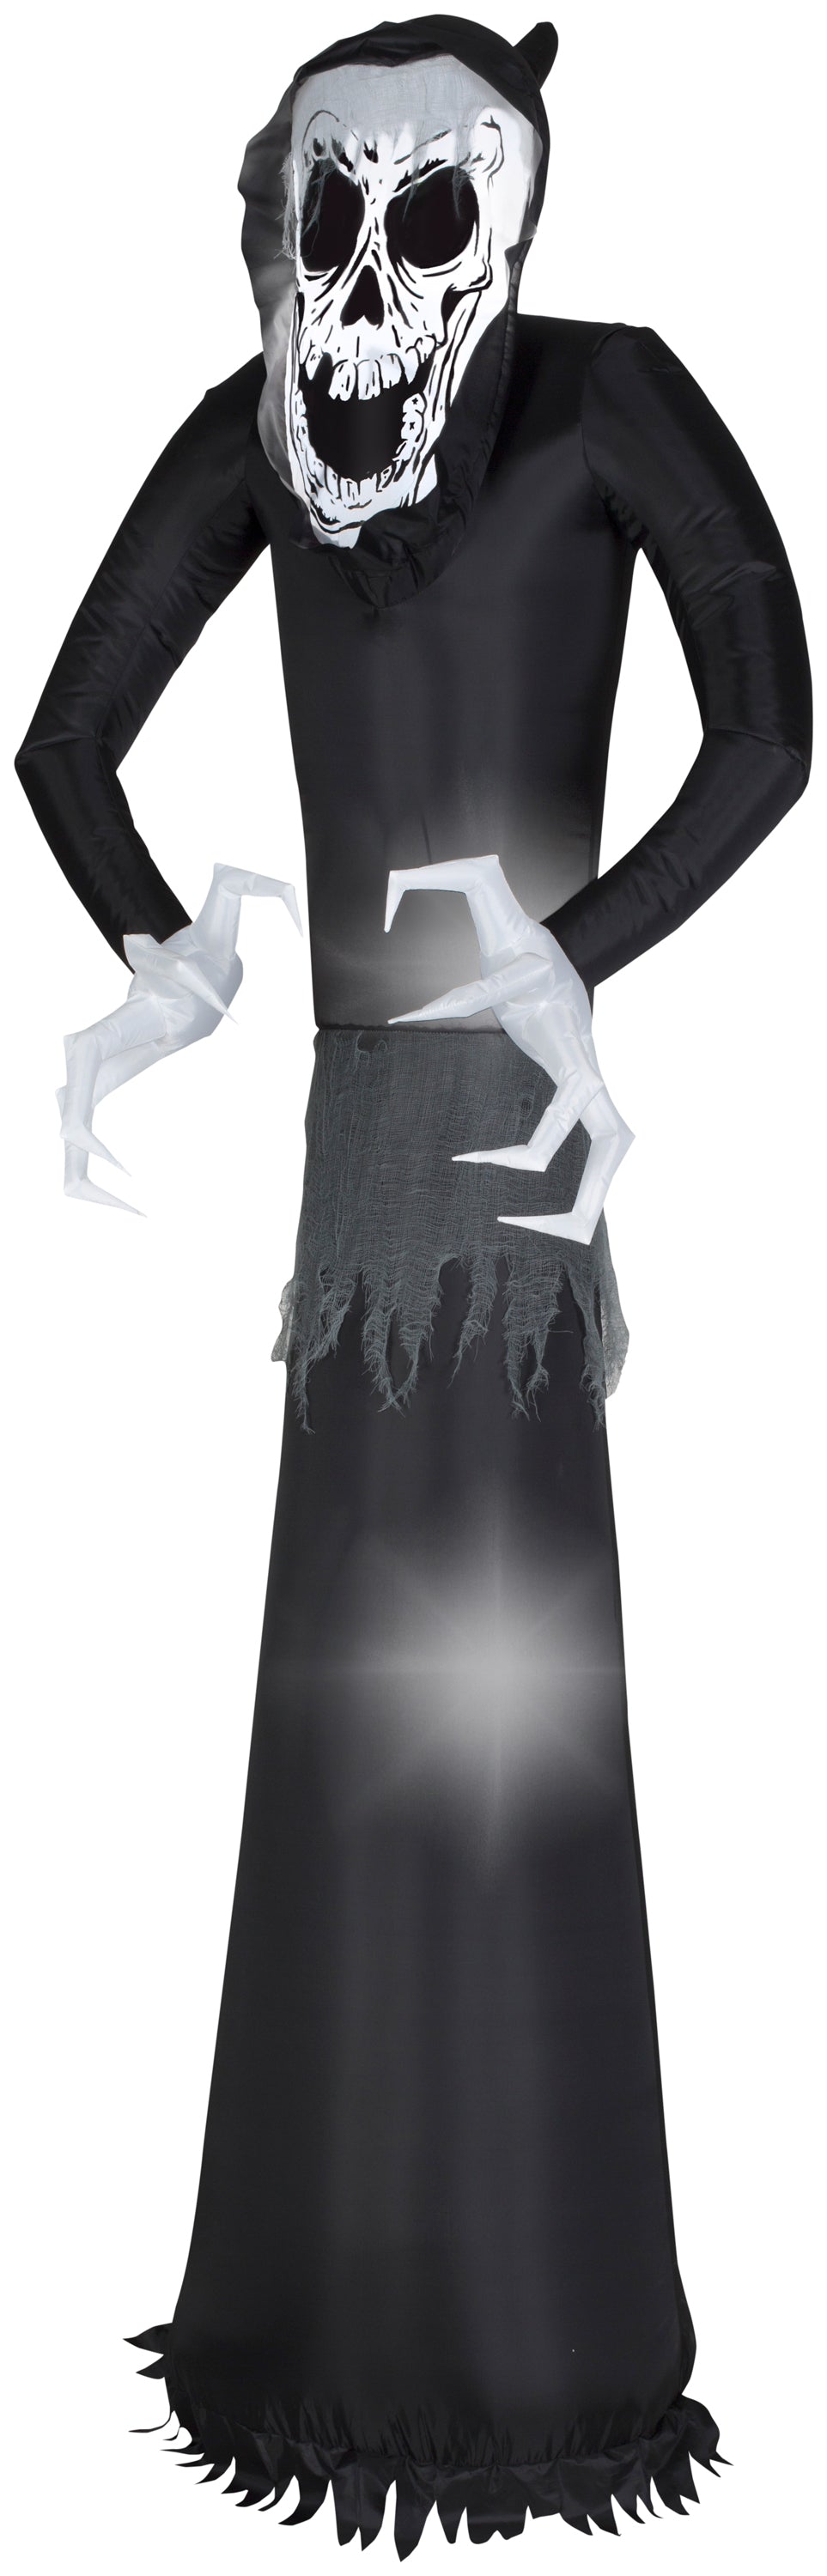 7' Airblown Welcome Reaper Halloween Inflatable